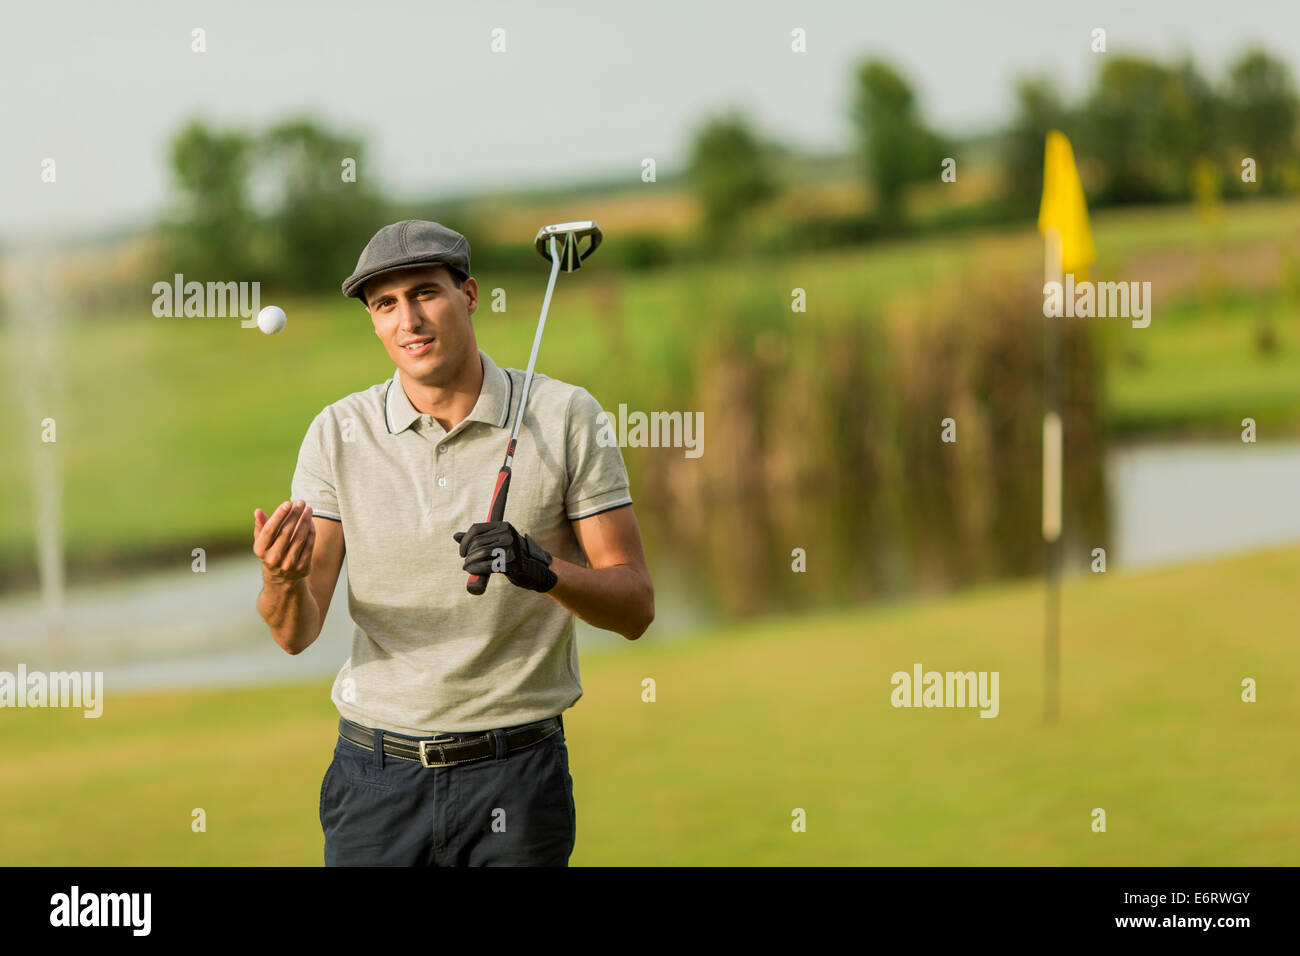 Young man playing golf Banque D'Images